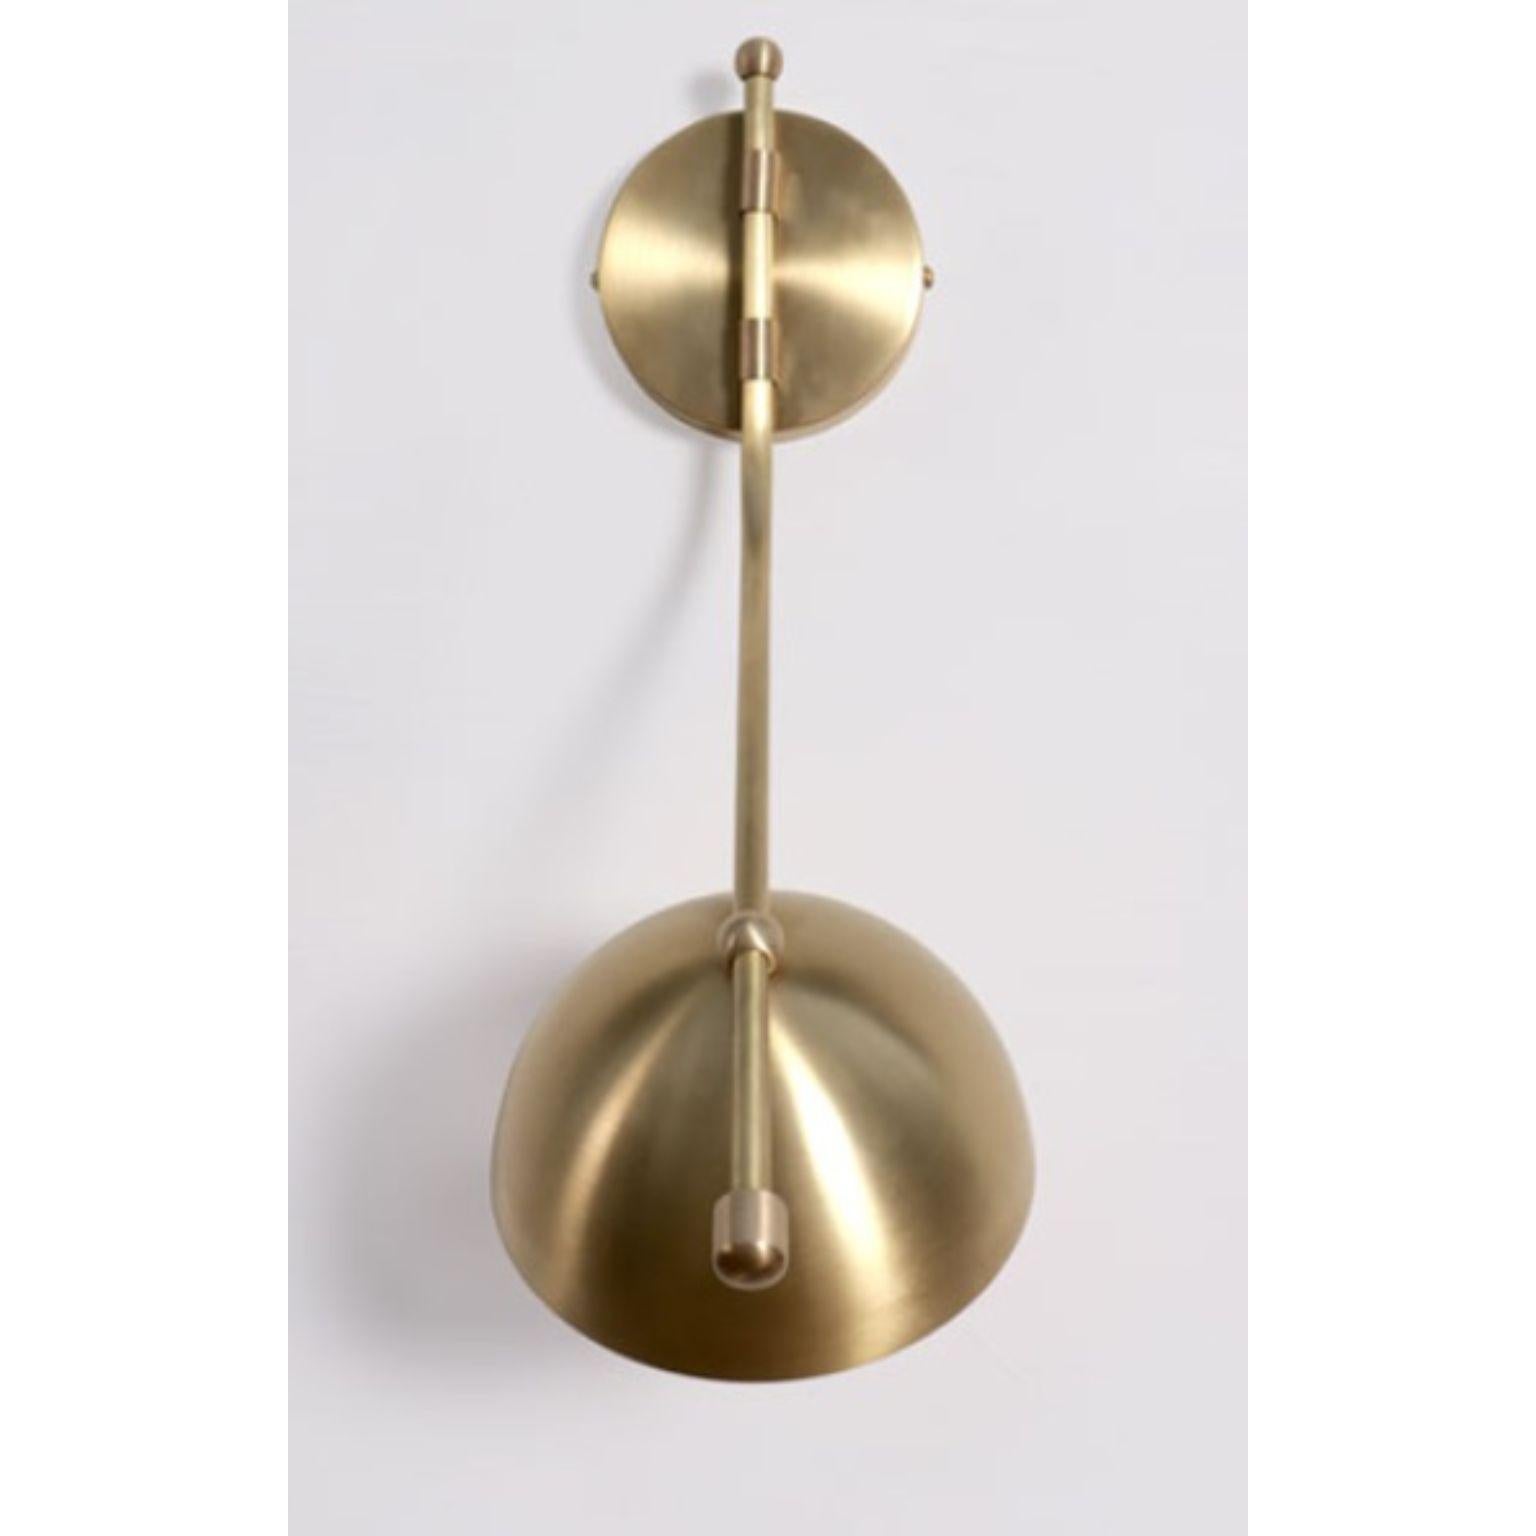 Wing Brass Dome Wall Sconce by Lamp Shaper
Dimensions: D 15.5 x W 27 x H 42 cm.
Materials: Brass.

Different finishes available: raw brass, aged brass, burnt brass and brushed brass Please contact us.

All our lamps can be wired according to each